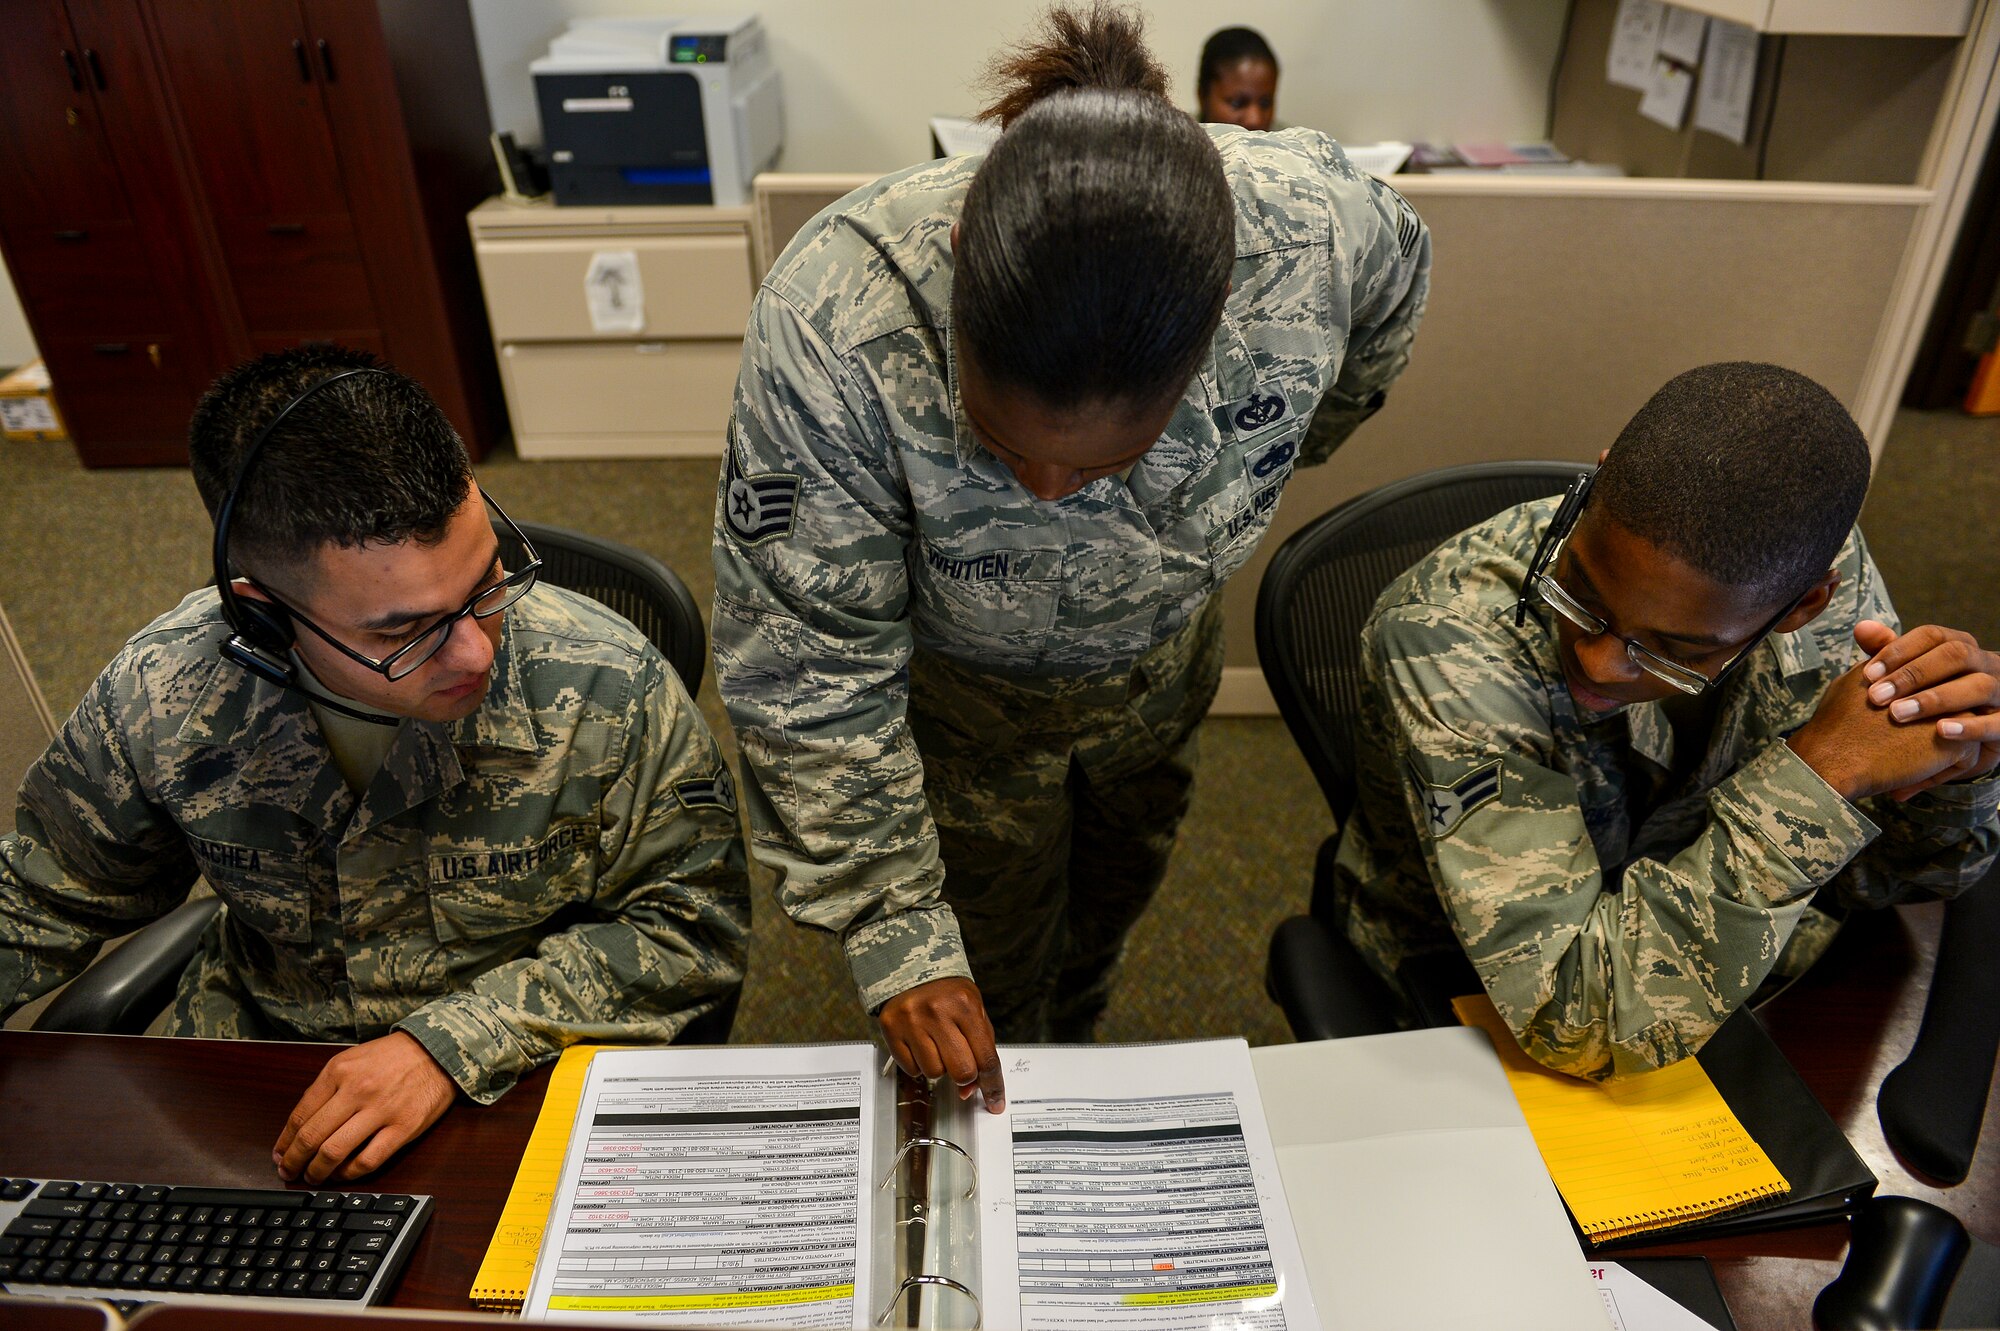 Staff Sgt. Konisha Whitten, 1st Special Operations Civil Engineer Squadron operations management, reviews completed work orders with Airman 1st Class Joseph Olachea and Airman 1st Class Charles Flowers, 1st SOCES civil engineer journeyman at the “Fish Bowl”, Hurlburt Field, Fla., Oct. 17, 2014. Airmen at the Fish Bowl take calls and create work orders for various shops at the 1st SOCES to complete around the base. (U.S. Air Force photo/Airman 1st Class Jeff Parkinson)